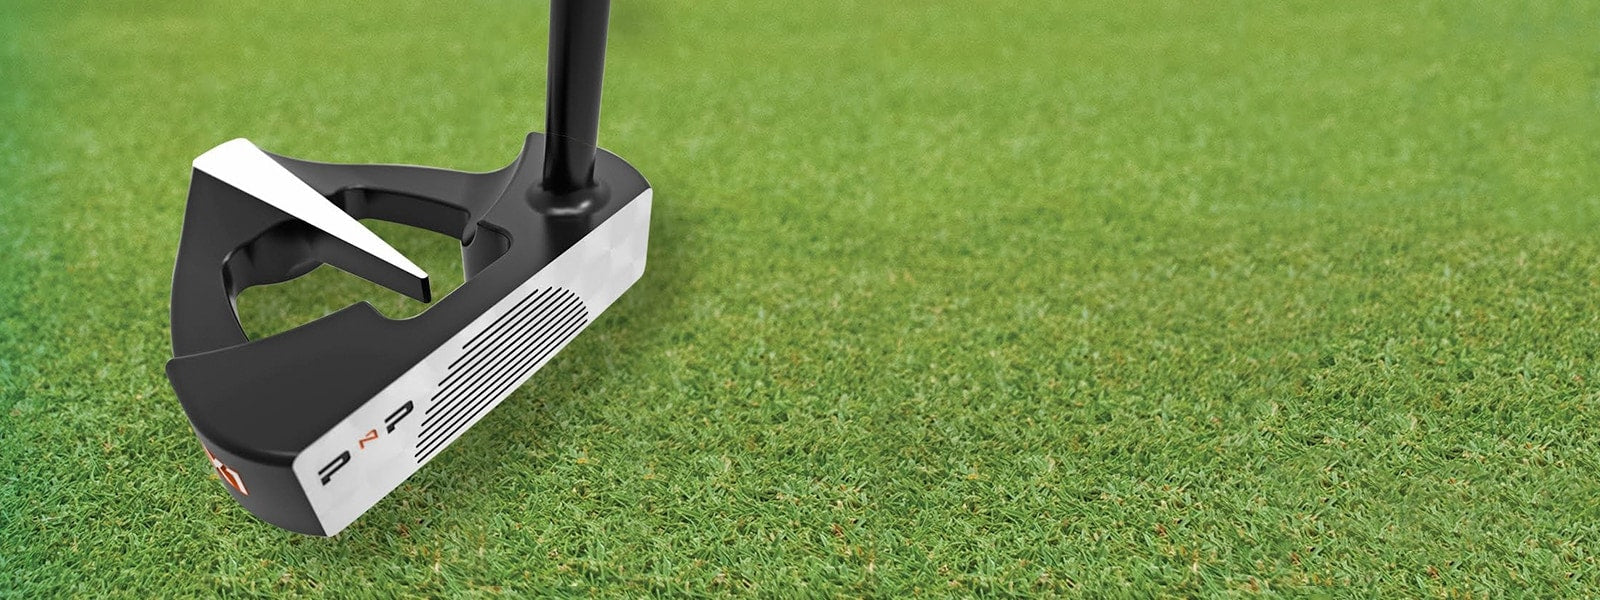 Putting the SX1 Point-N-Putt Putter to the Test